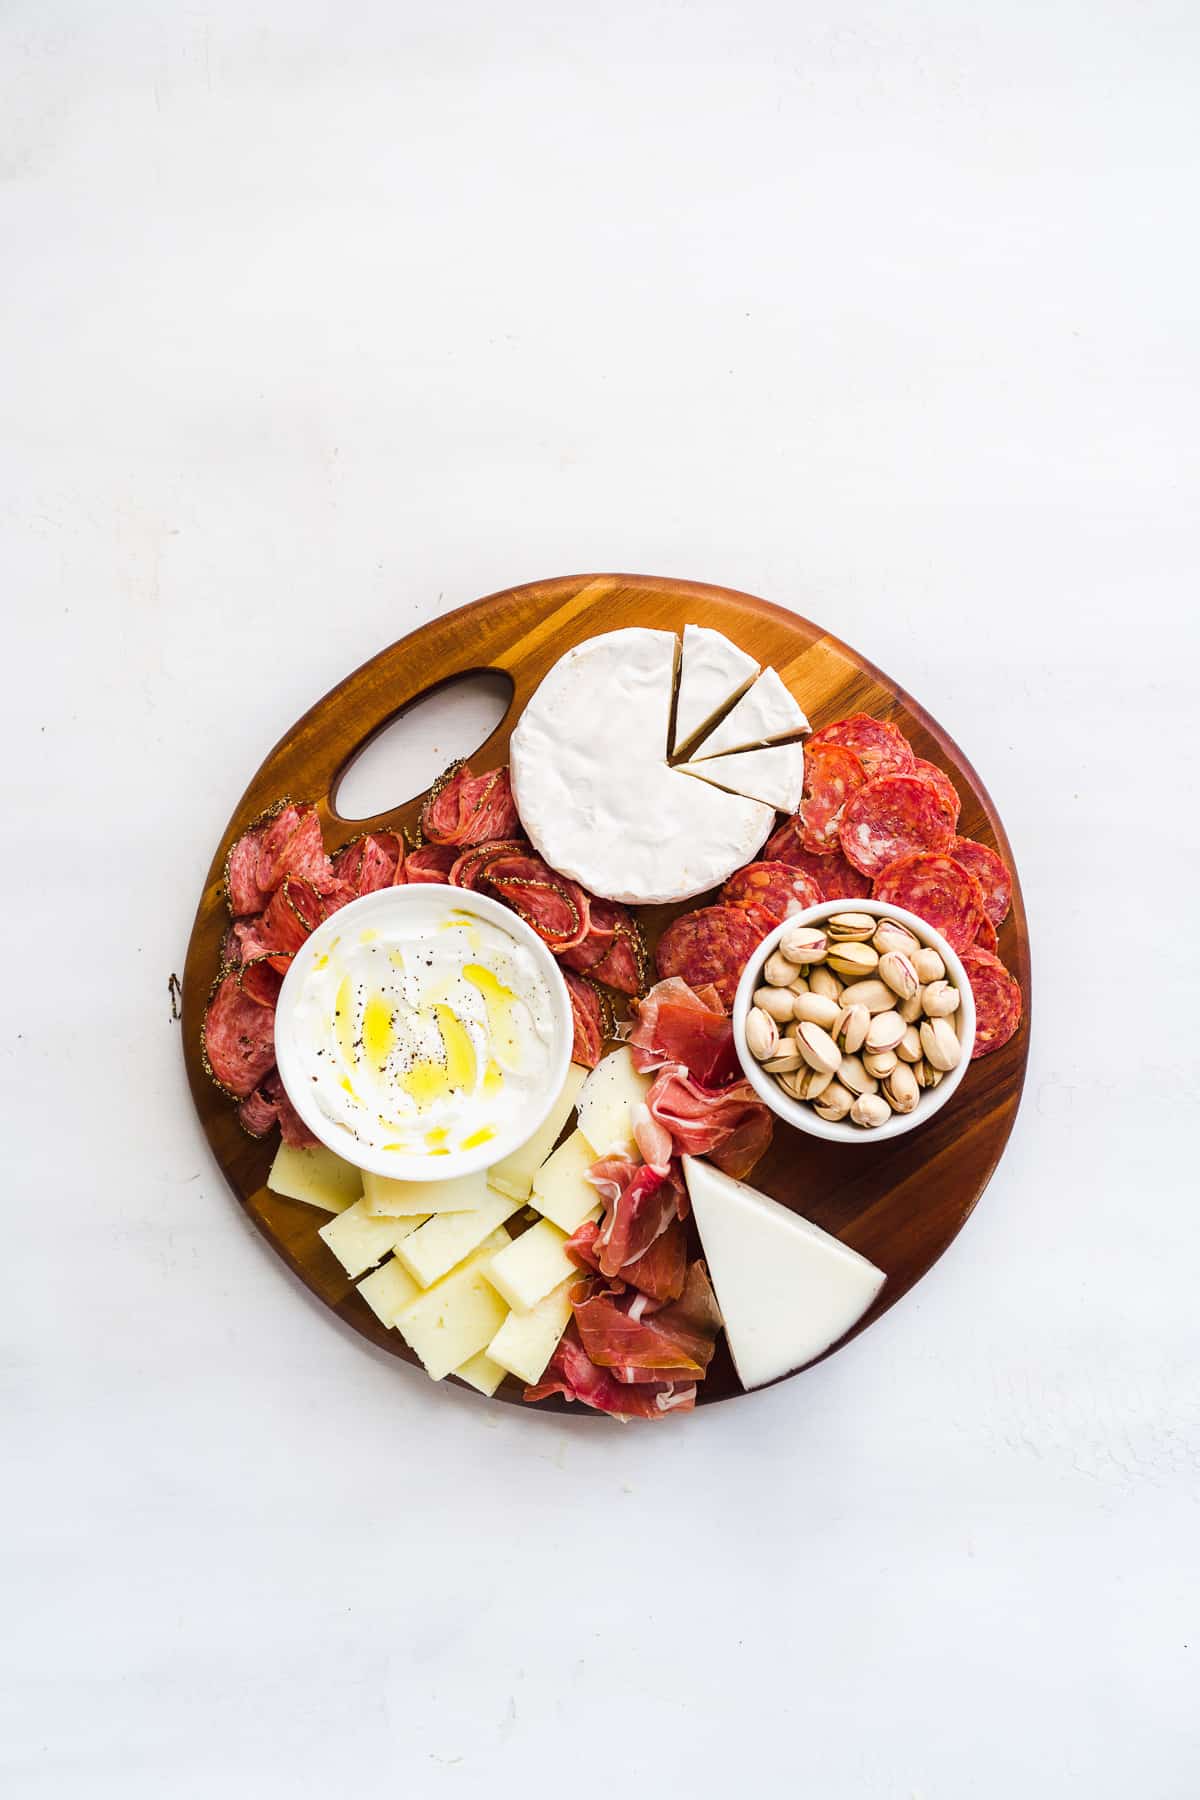 Platter with cheeses and meats on a white surface.